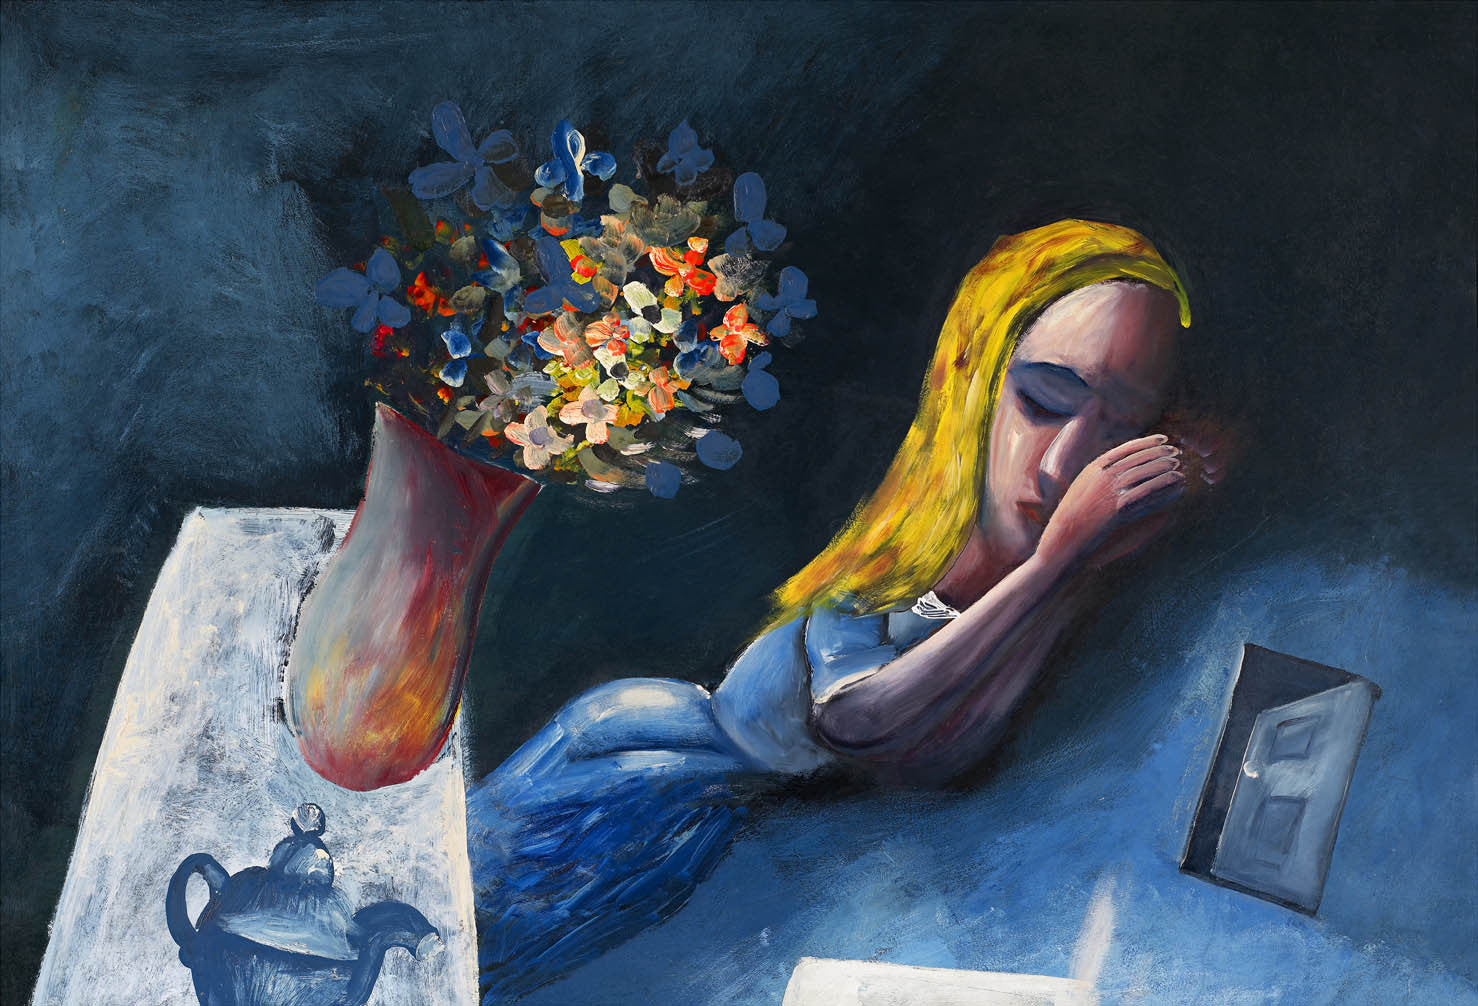 Charles Blackman 'Dreaming Alice' - archival pigment print on paper